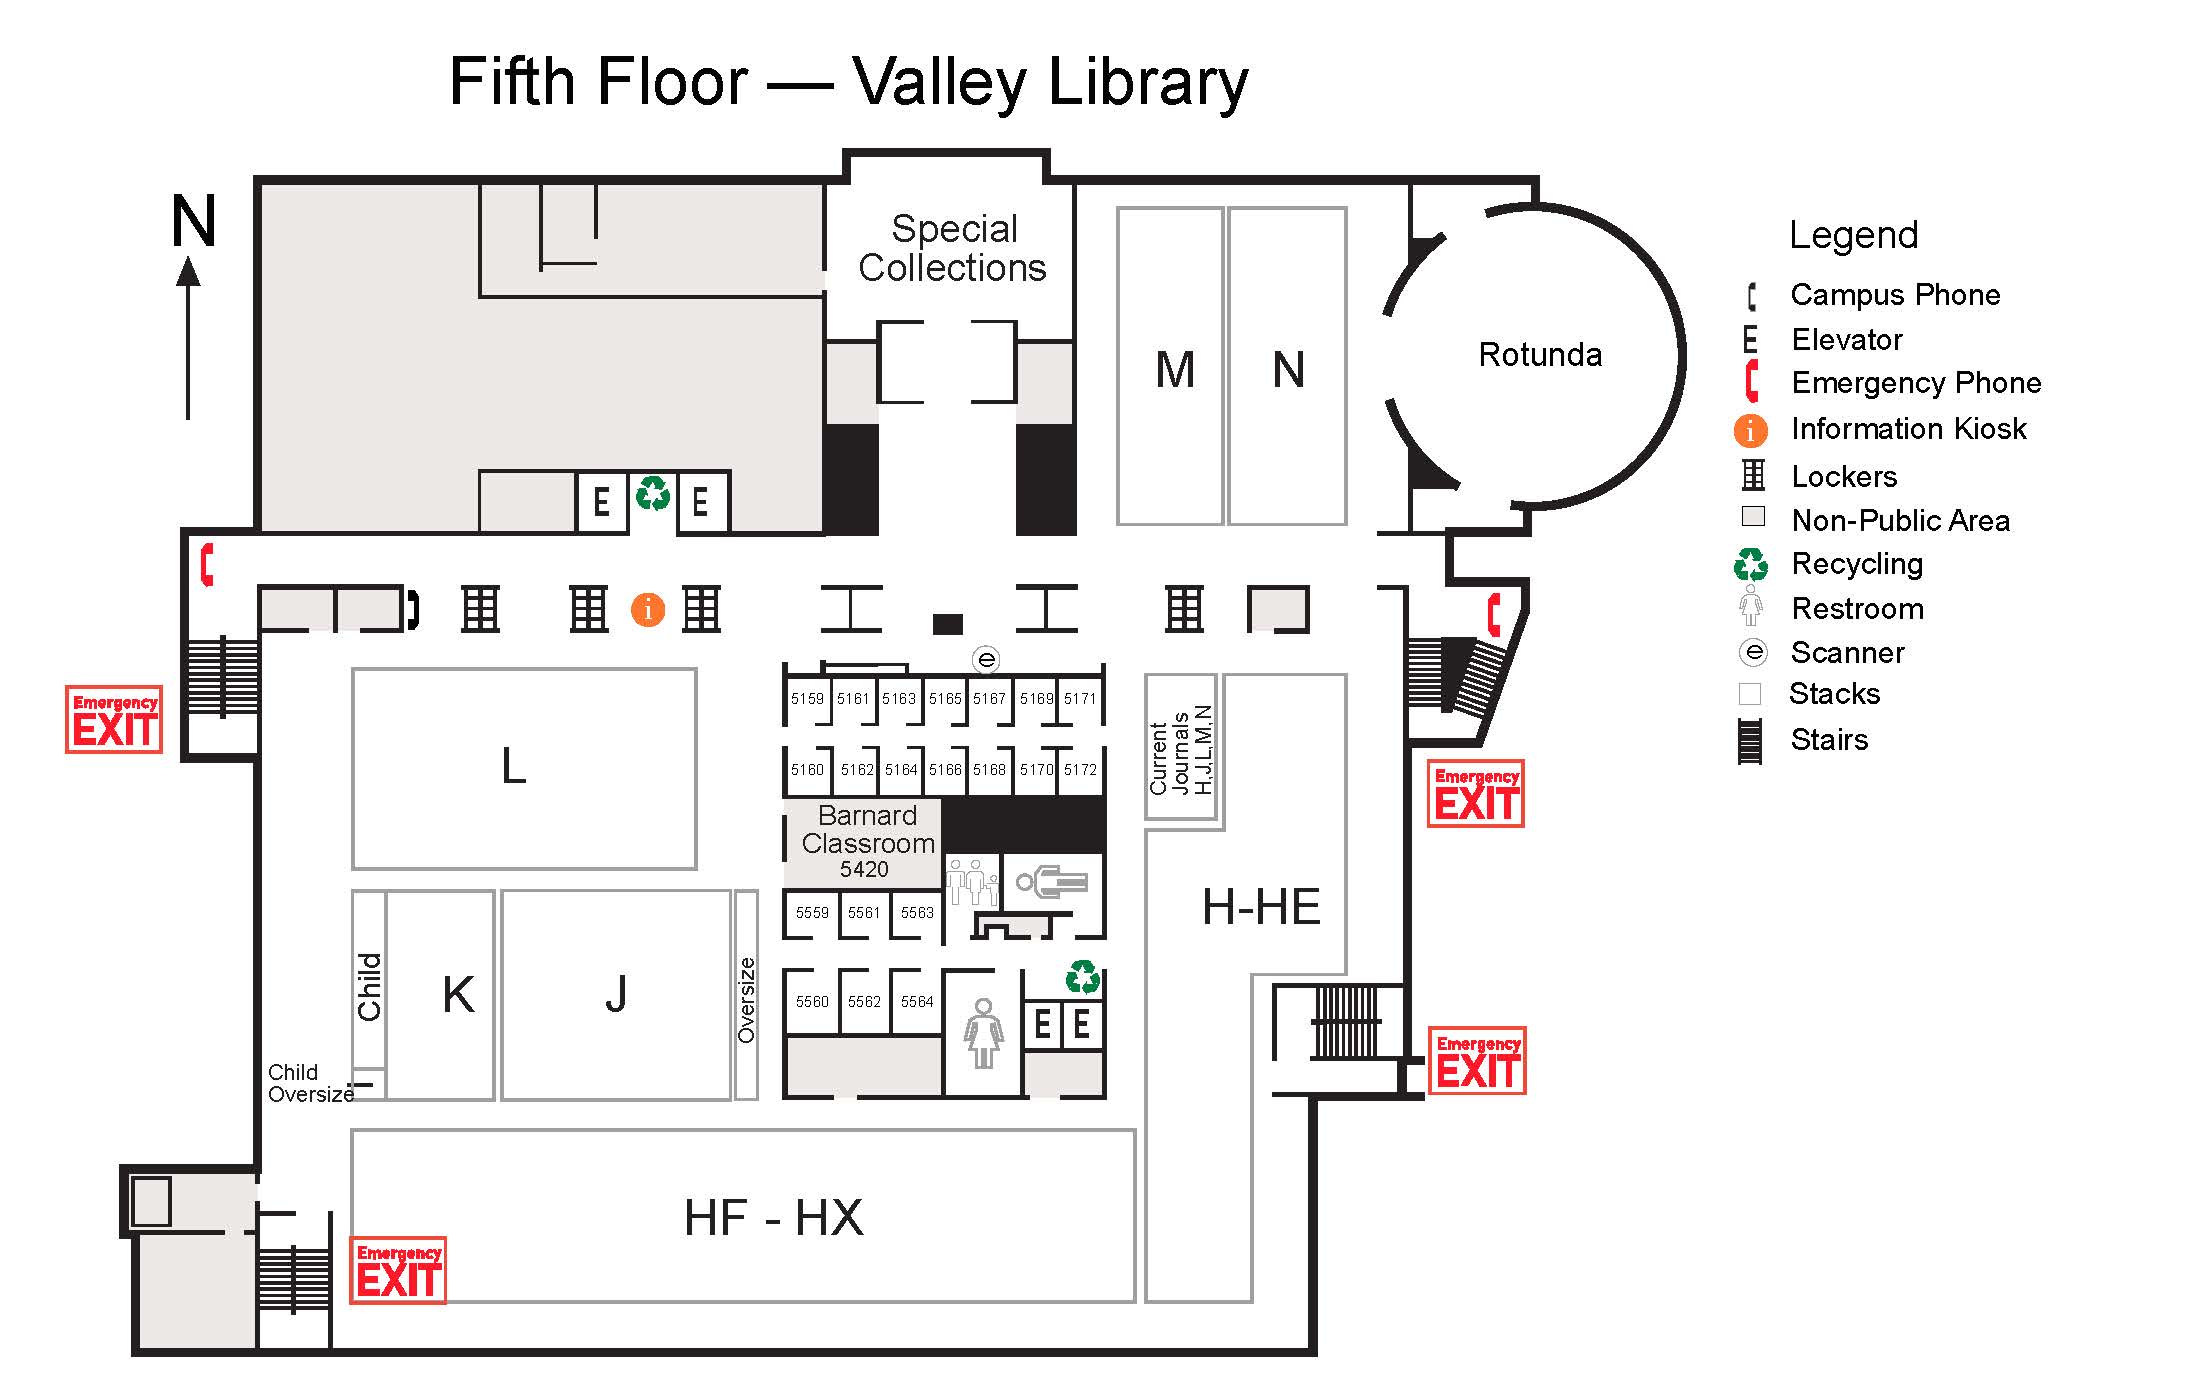 Valley Library Fifth Floor Map